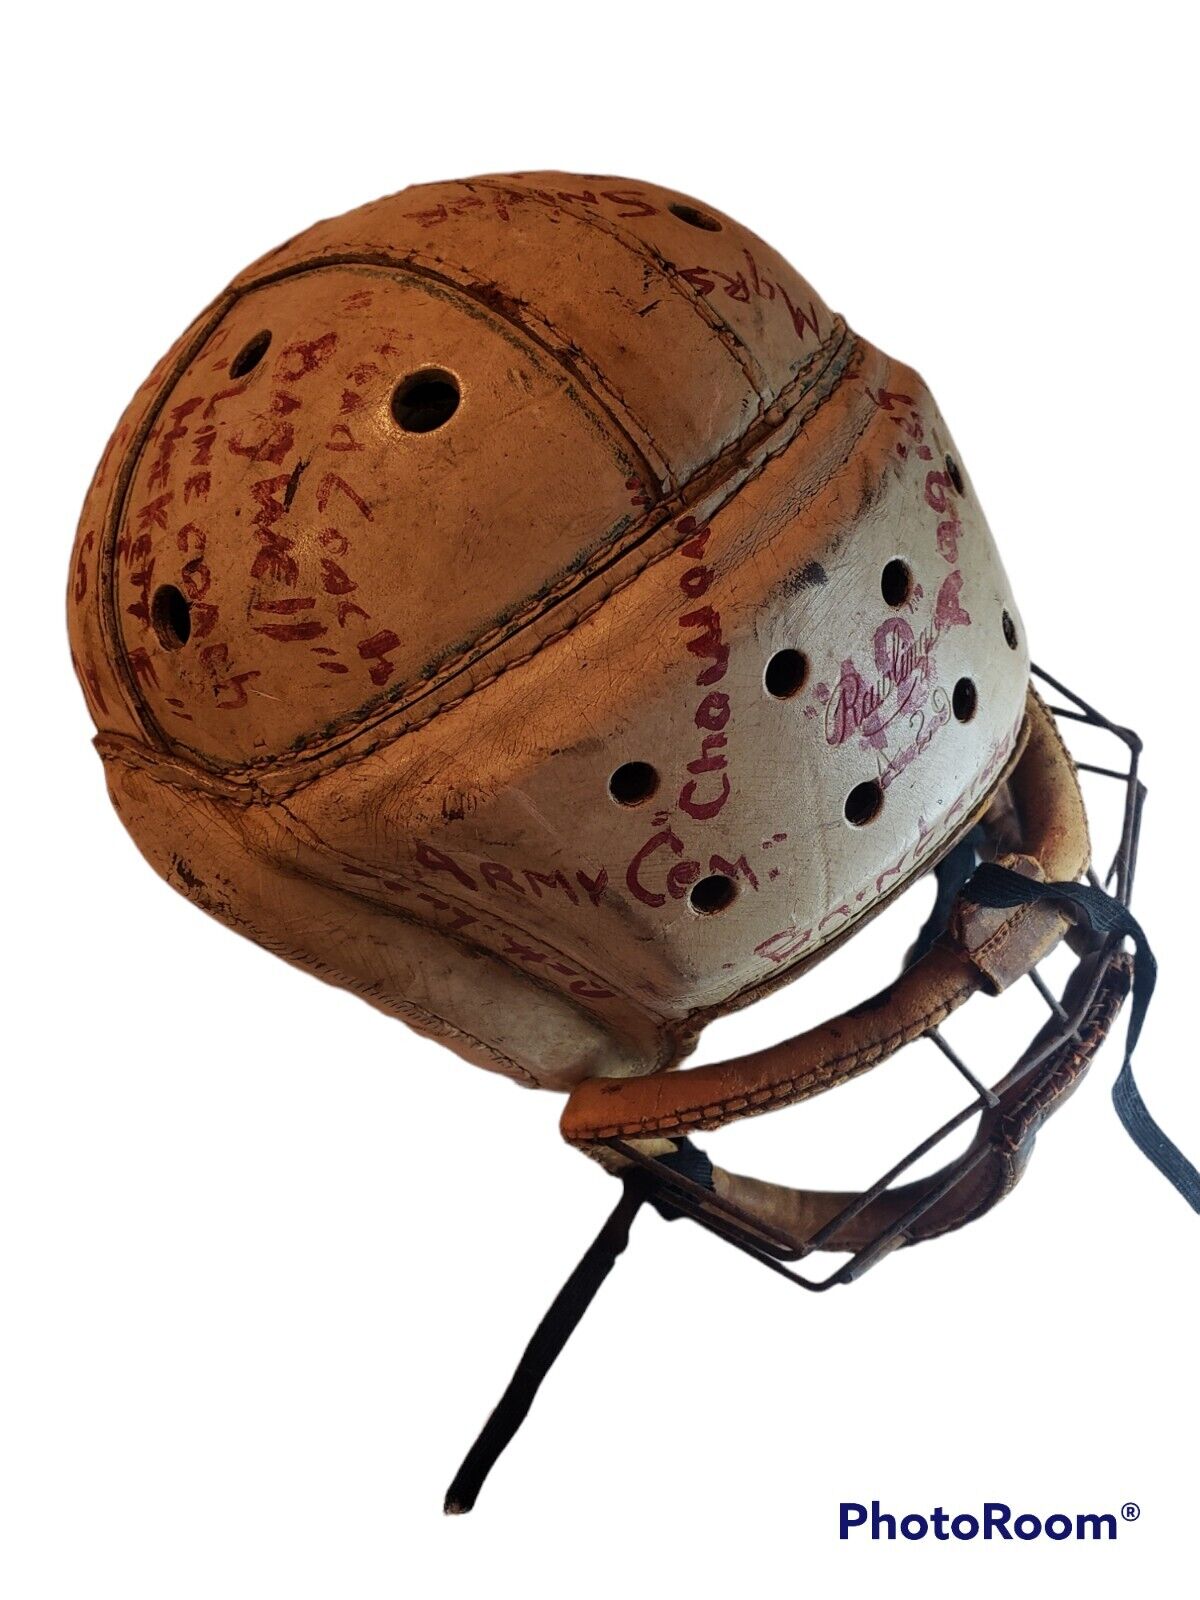 1930s/40s Leather Football Helmet Signed by Team w/Facemask